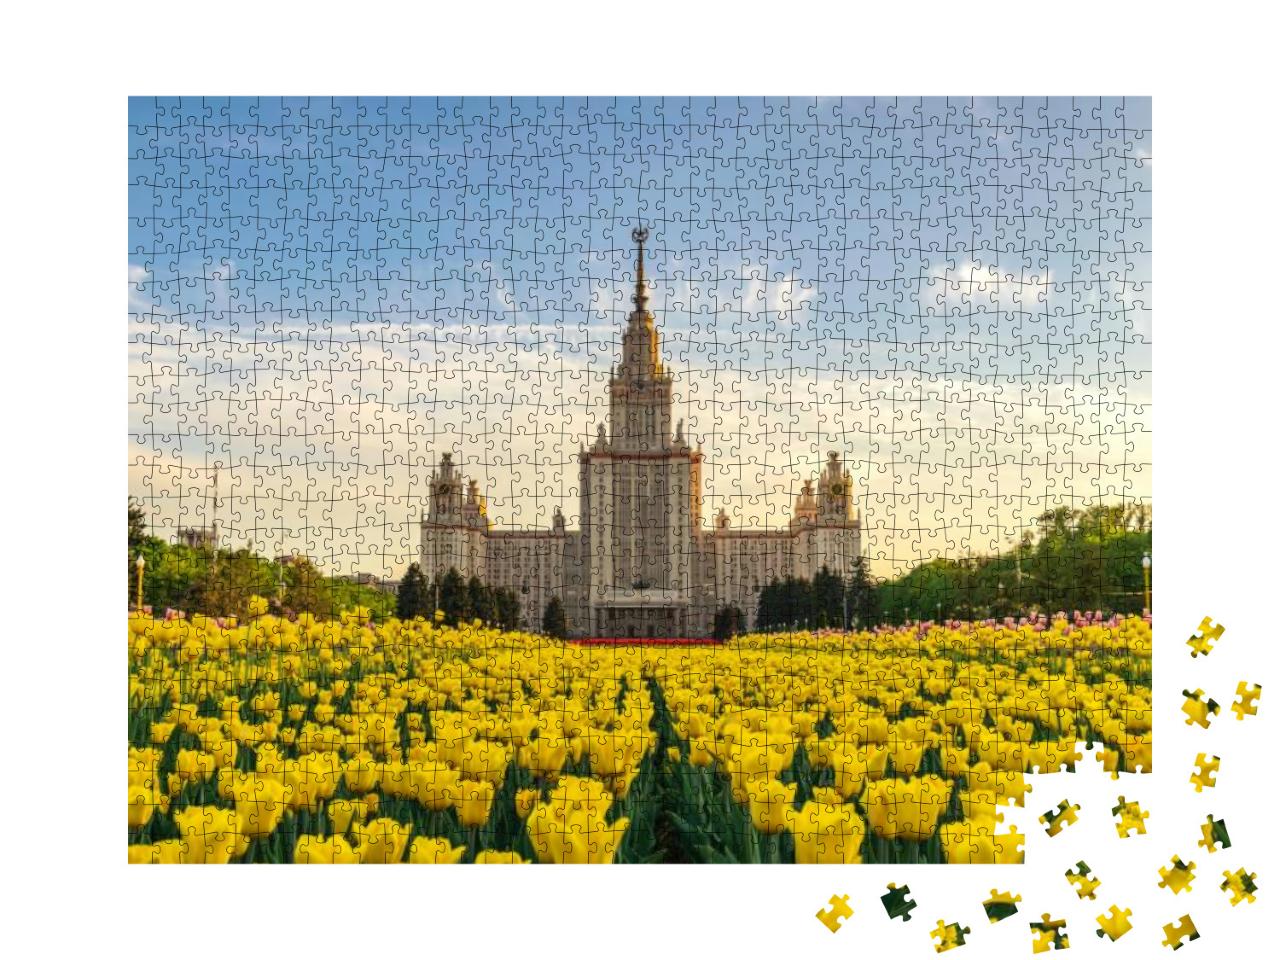 Moscow Russia, Spring Tulip Flowers At Lomonosov Moscow S... Jigsaw Puzzle with 1000 pieces